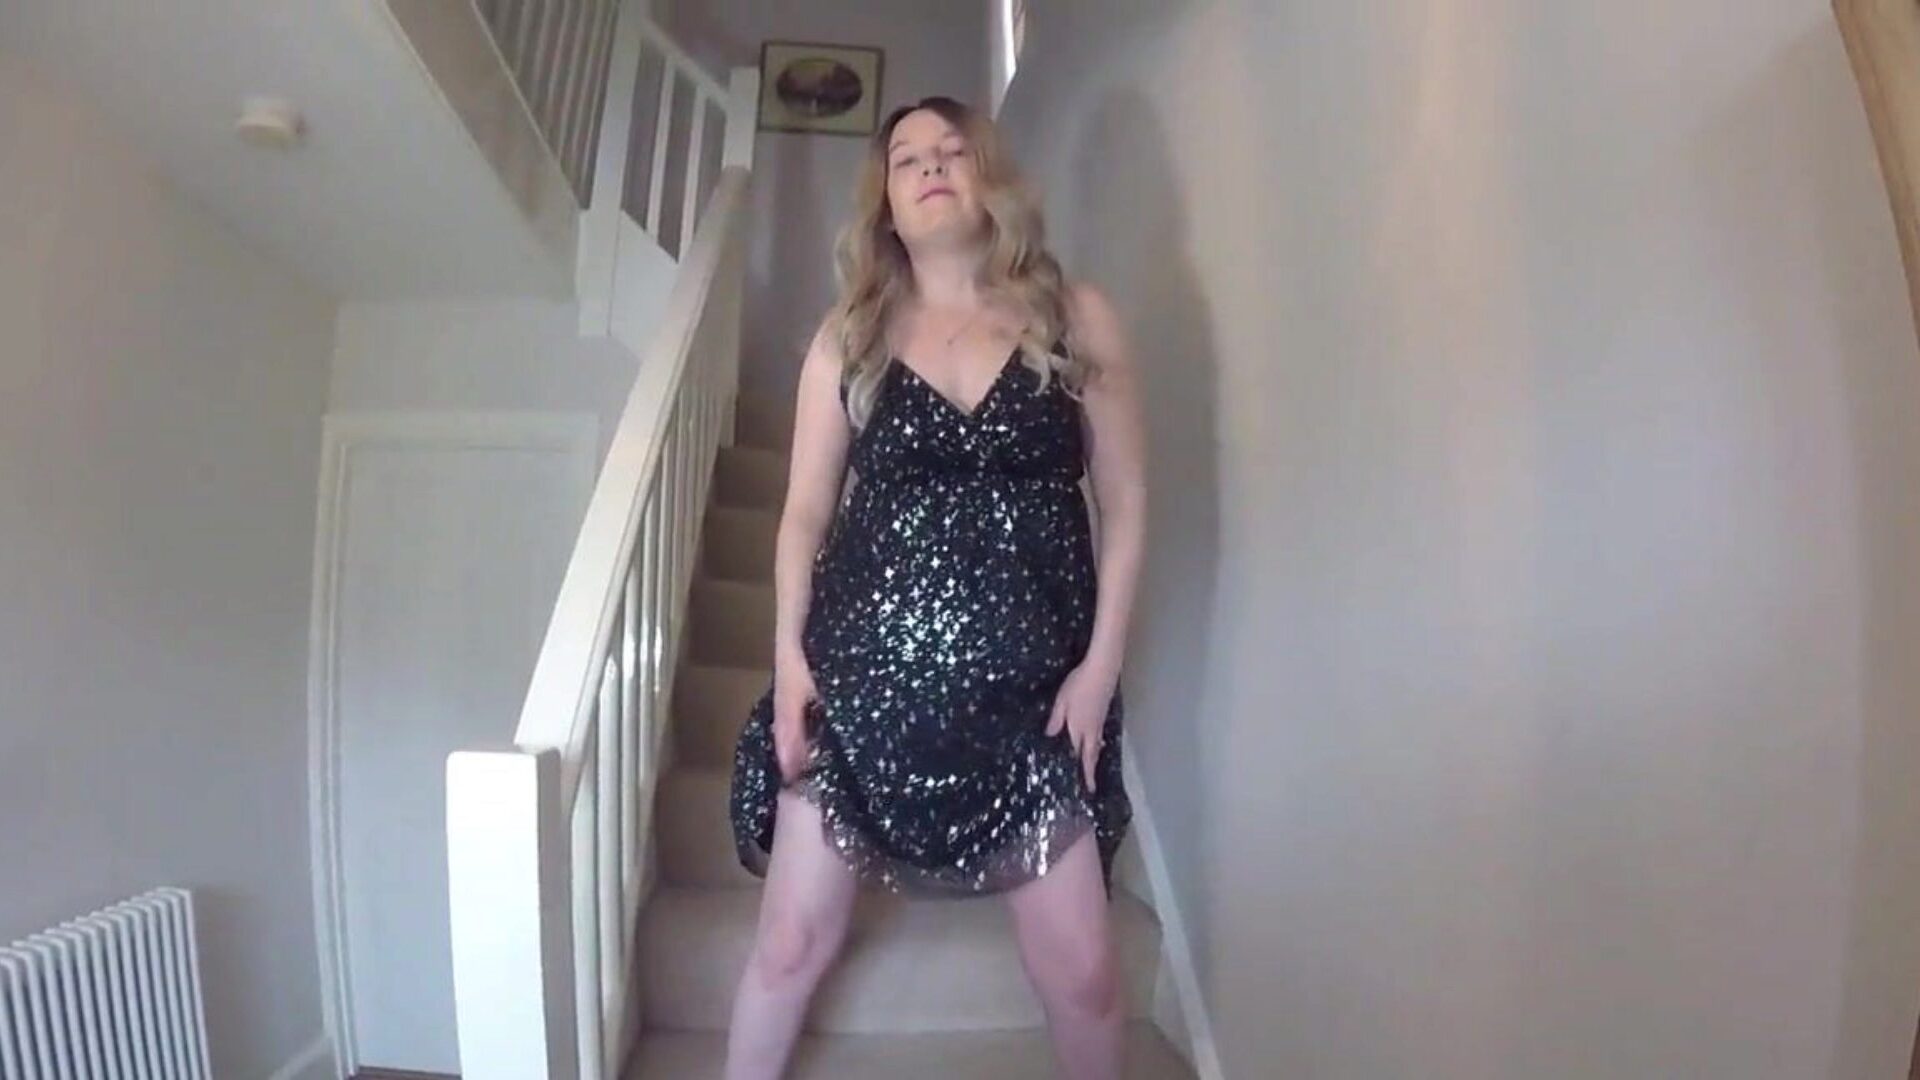 Party Dress British wife Haley in Party Dress on the stairs